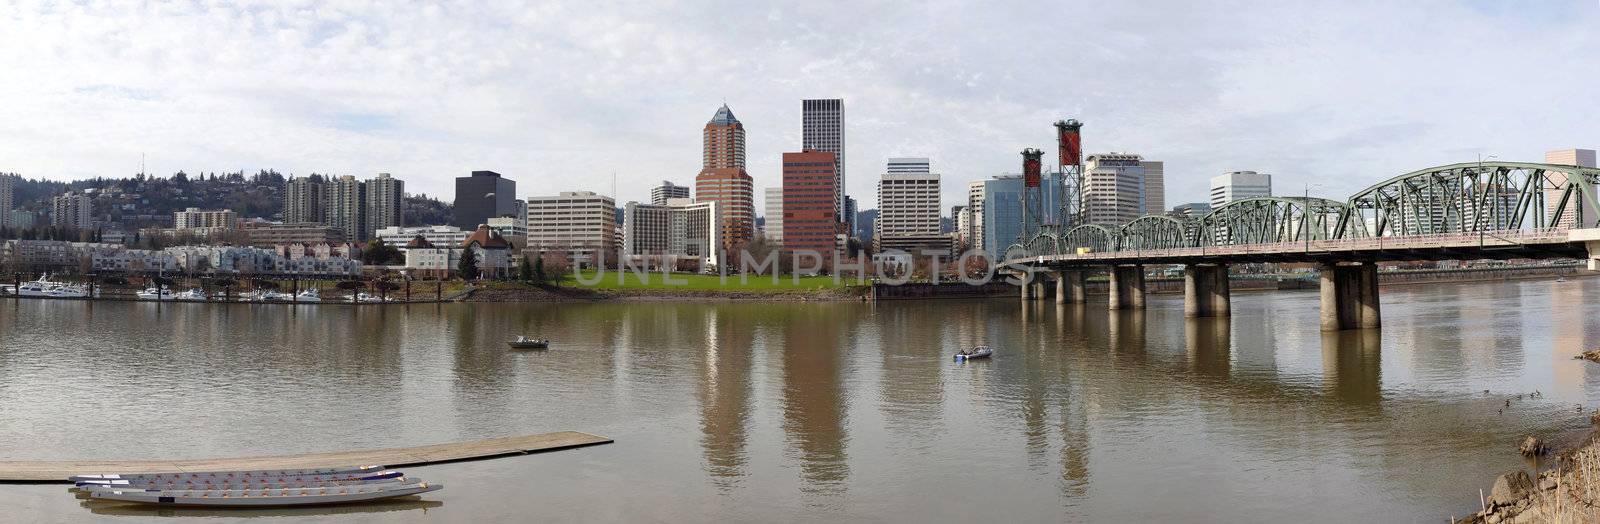 Portland Oregon panorama and the Willamette river view.